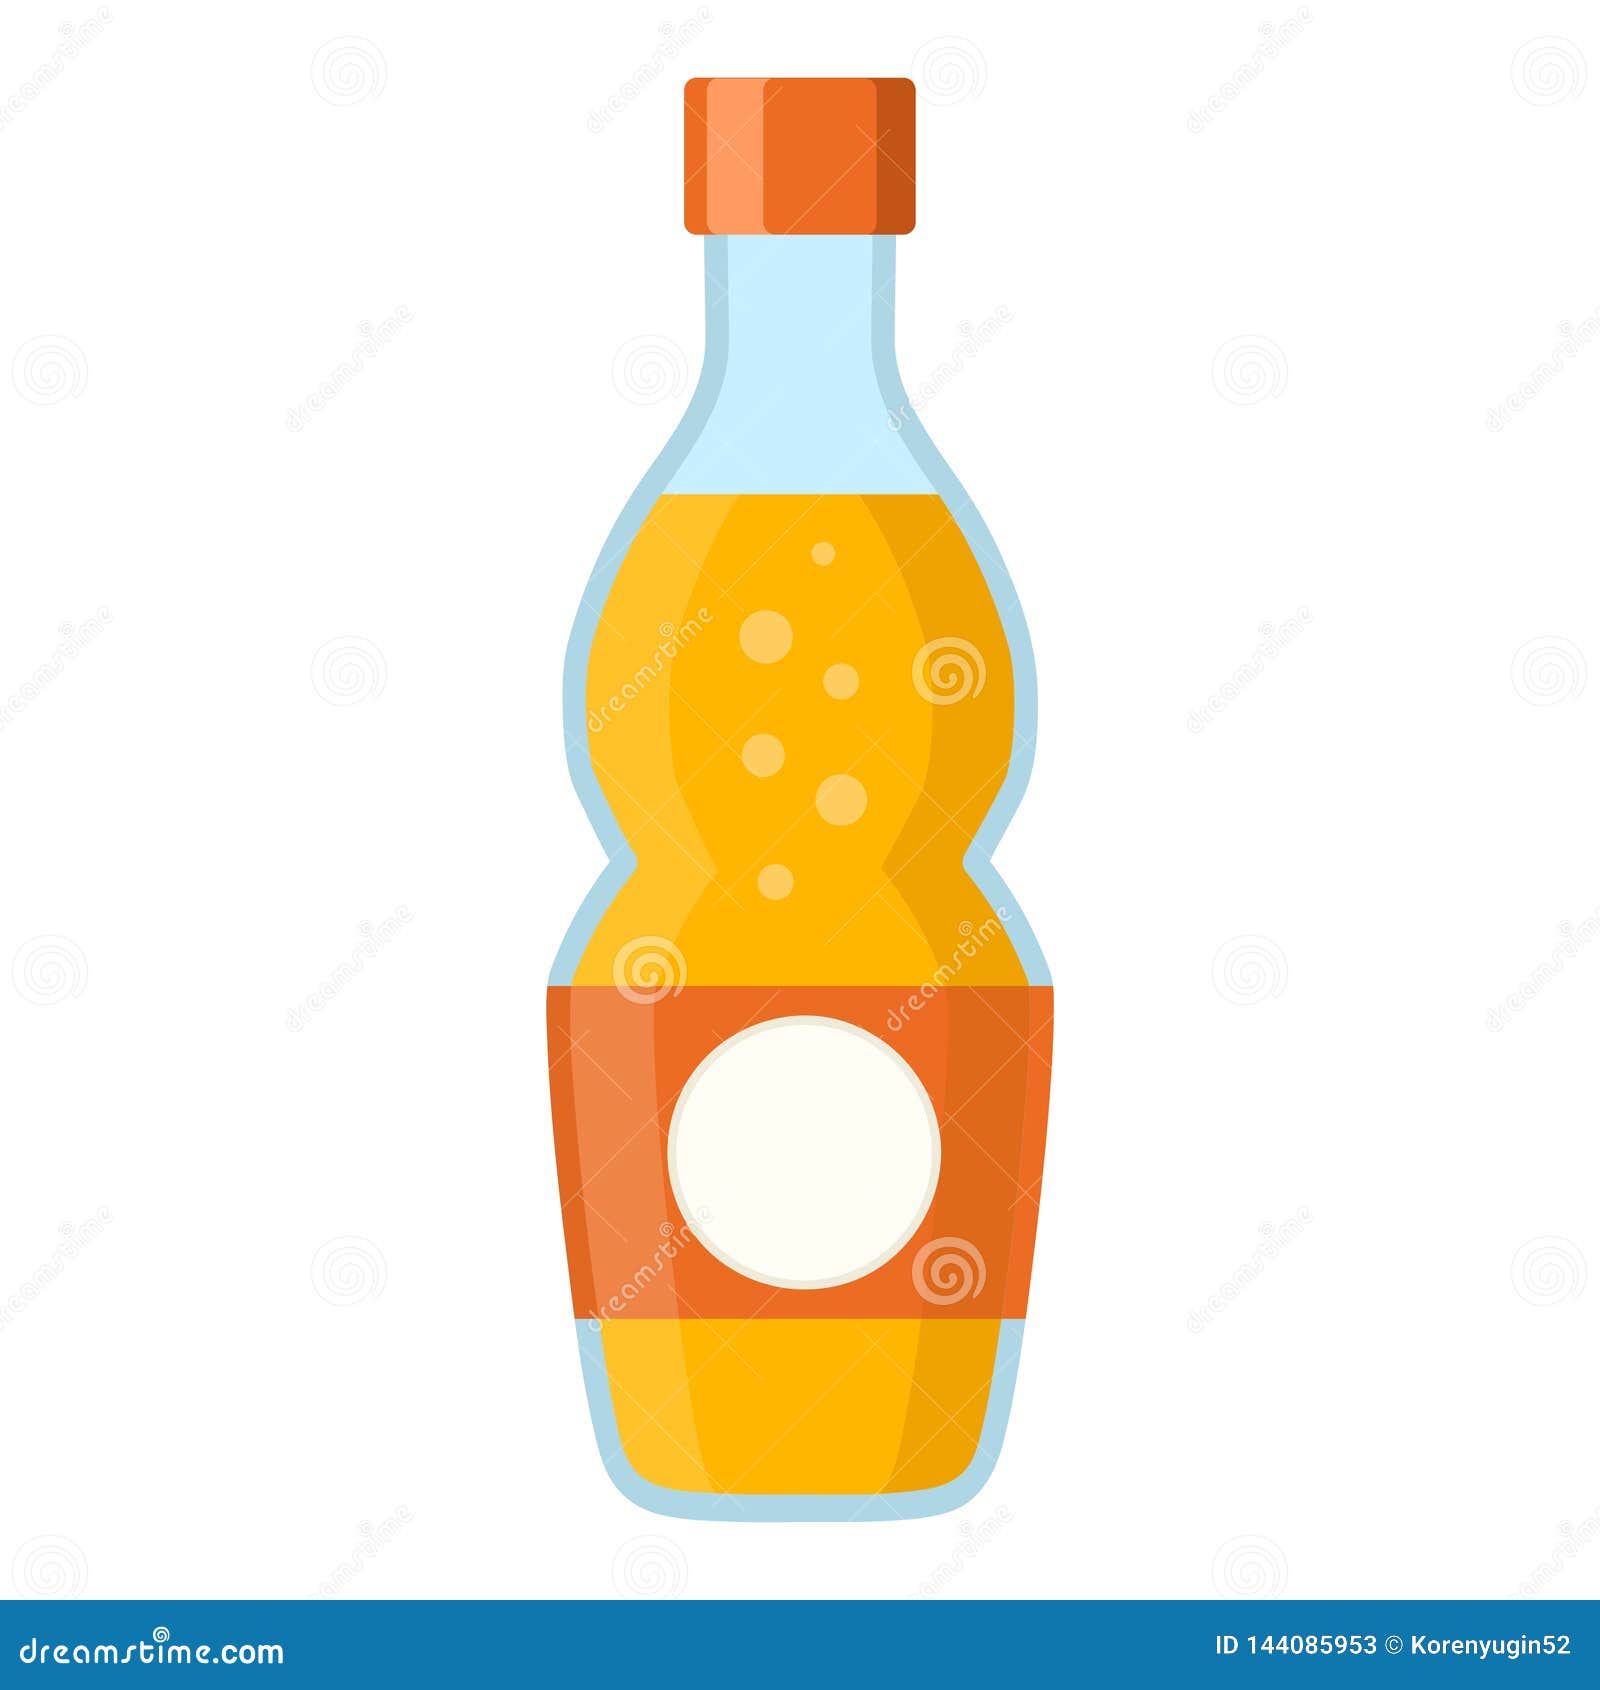 Bottle with Orange Water in Cartoon Flat Style on White, Stock Vector  Illustration Stock Vector - Illustration of style, beverage: 144085953